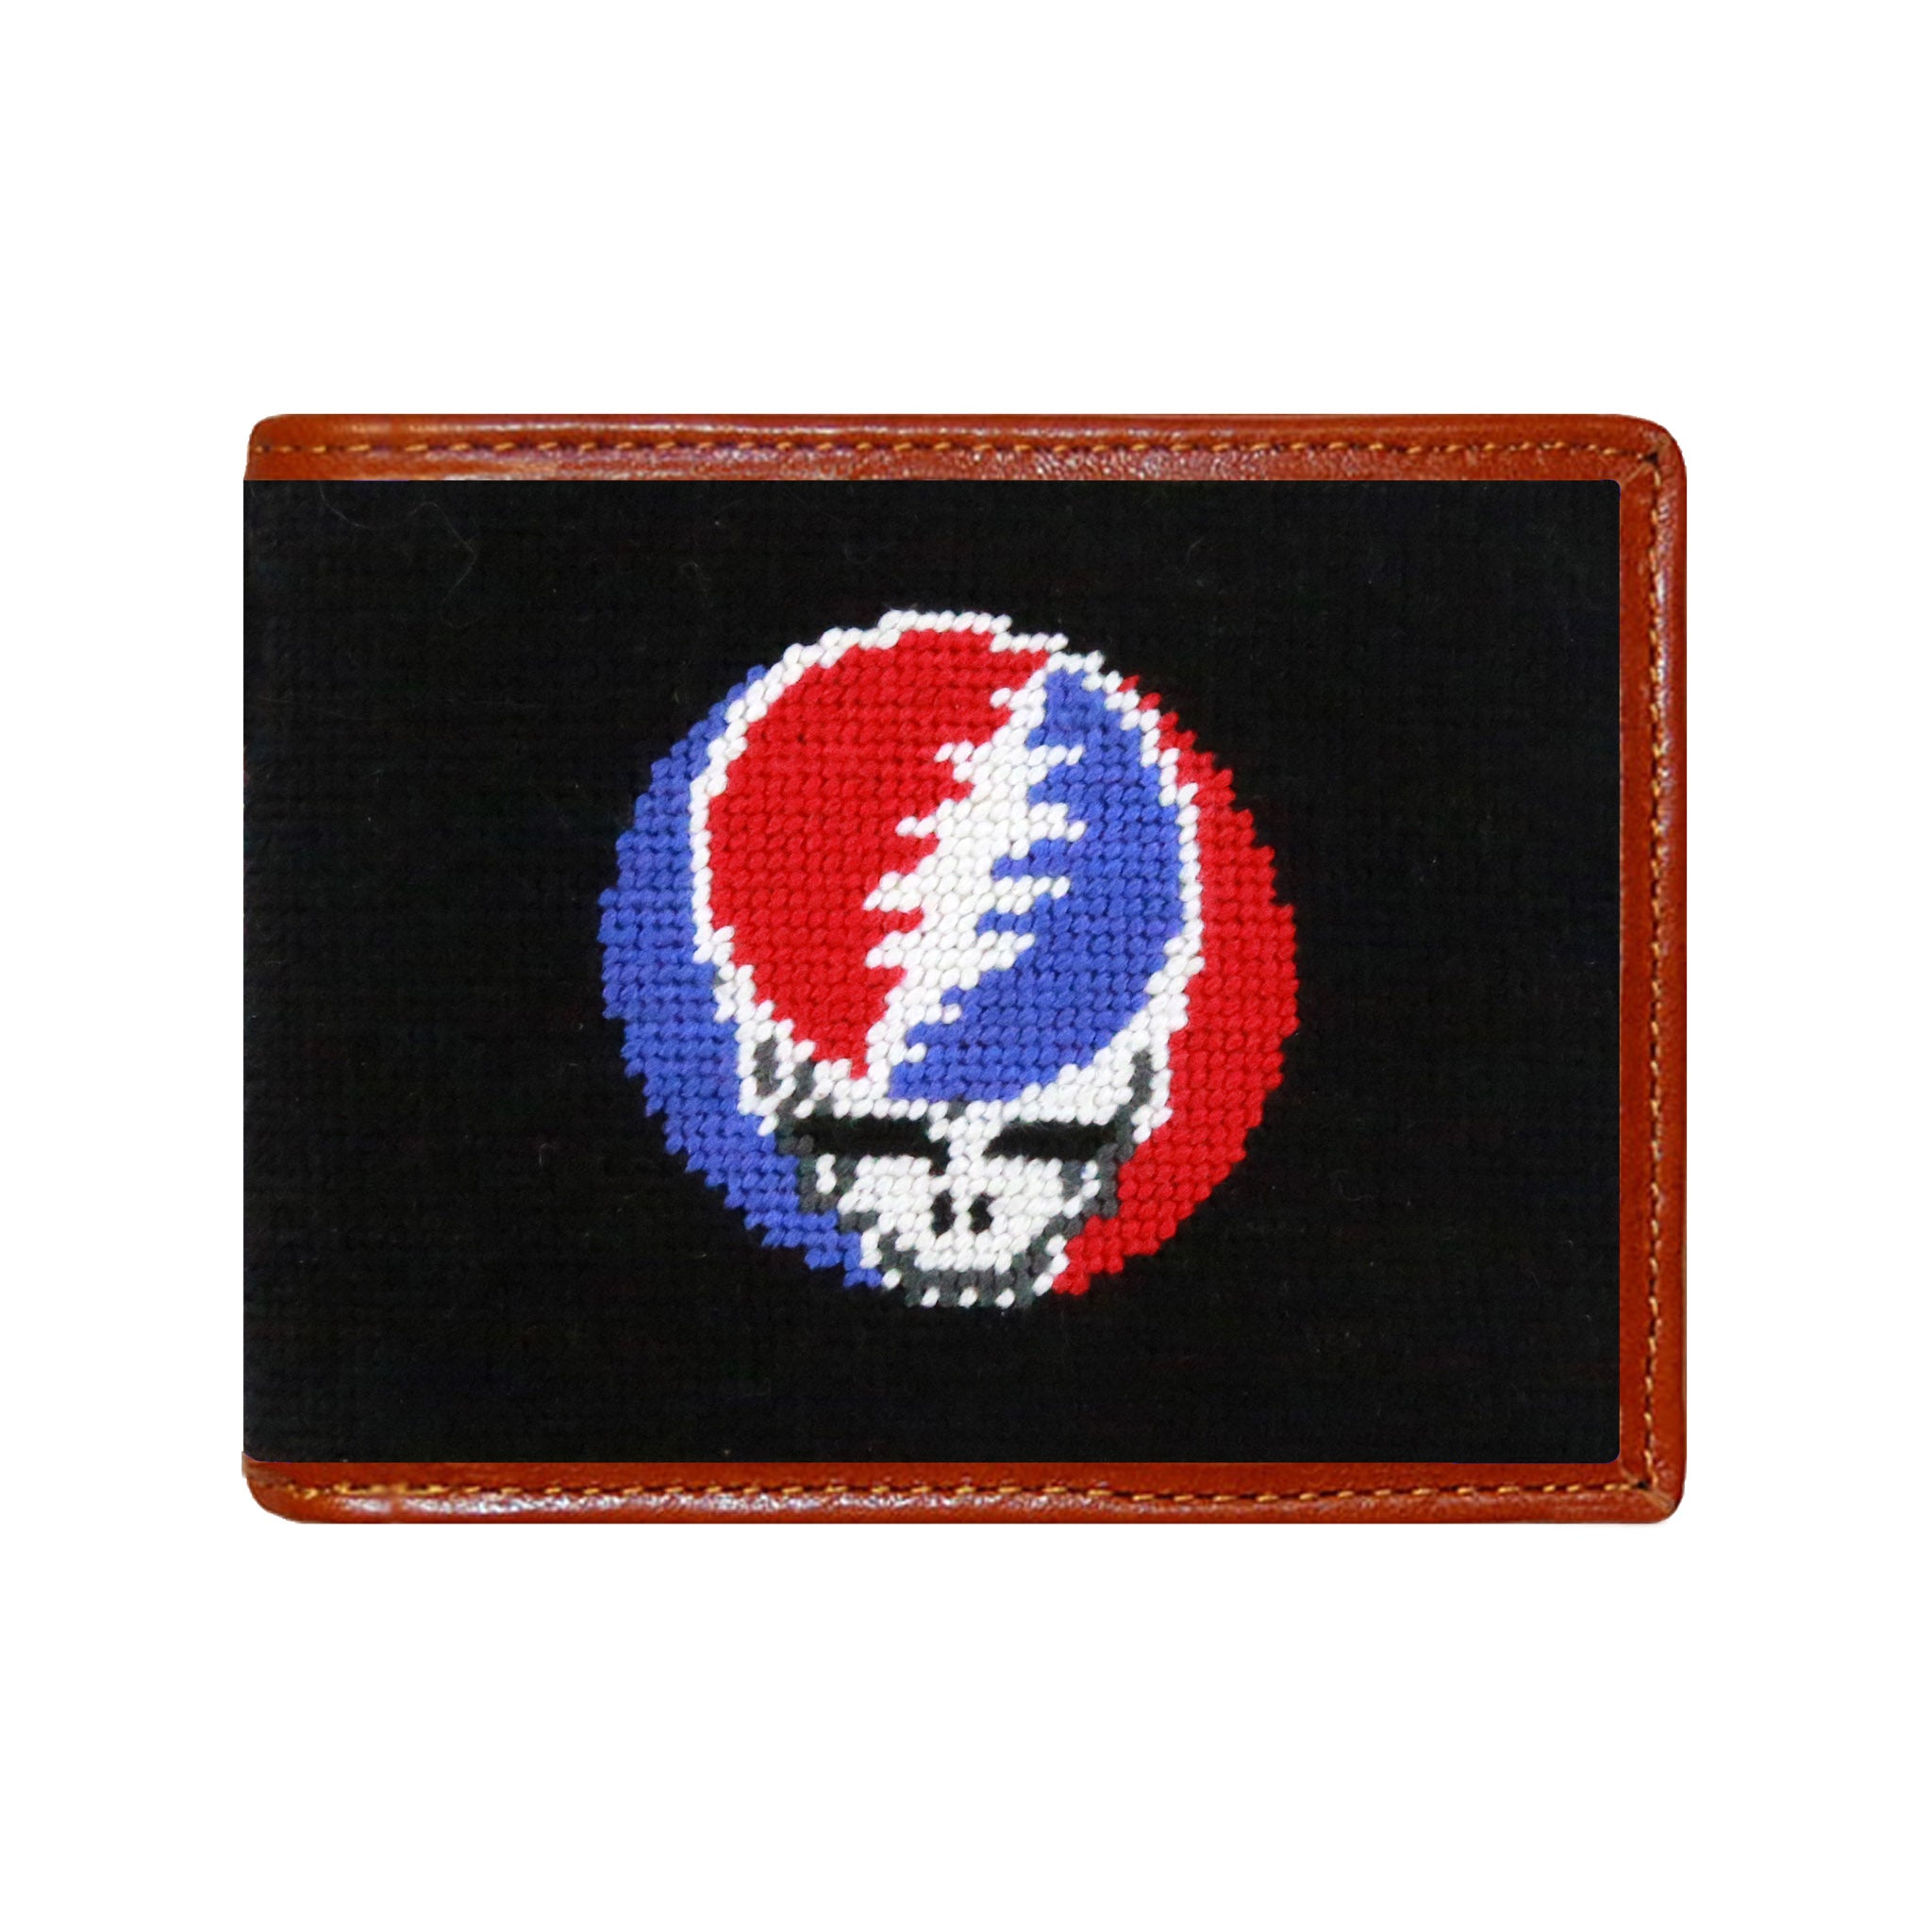 Smathers and Branson Steal Your Face Black Needlepoint Bi-Fold Wallet  